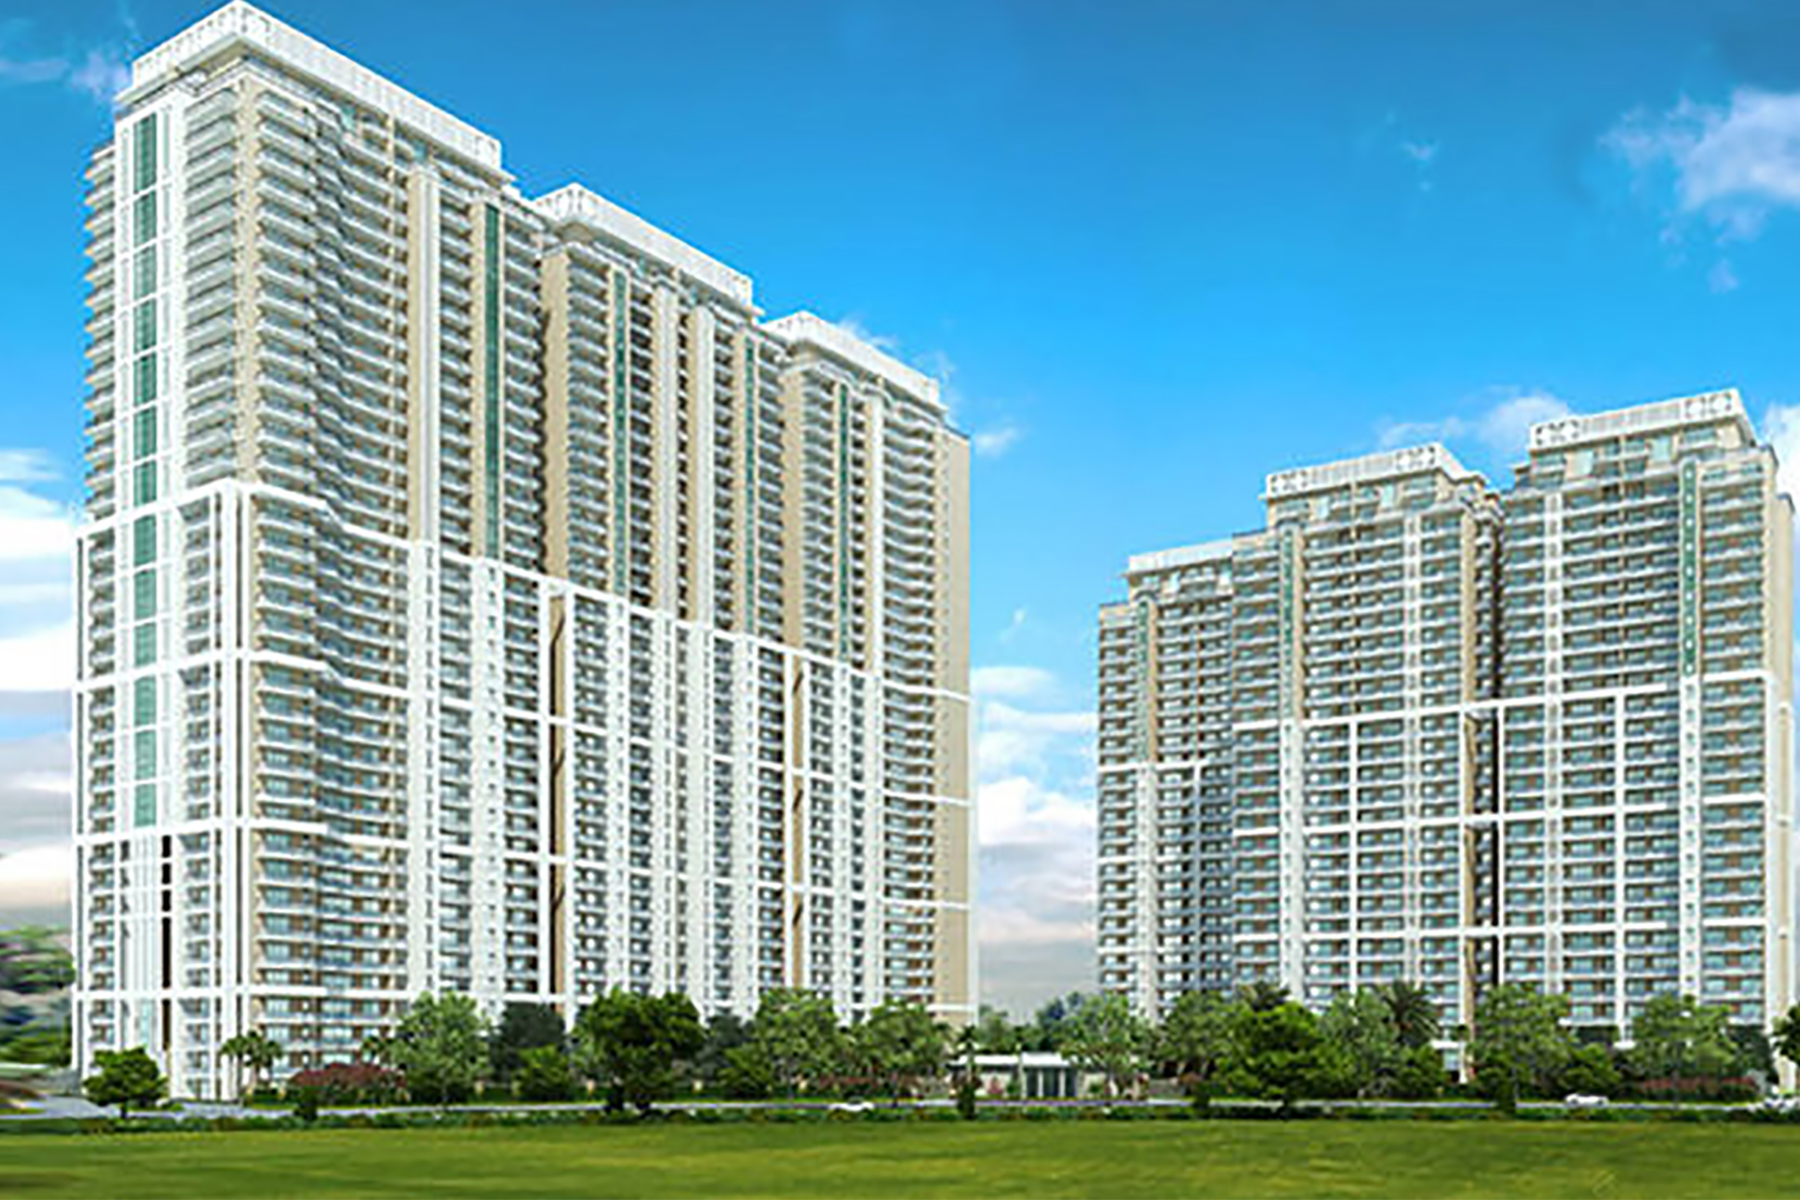 Gurgaon Projects in the Works Are Ready for Luxury Living